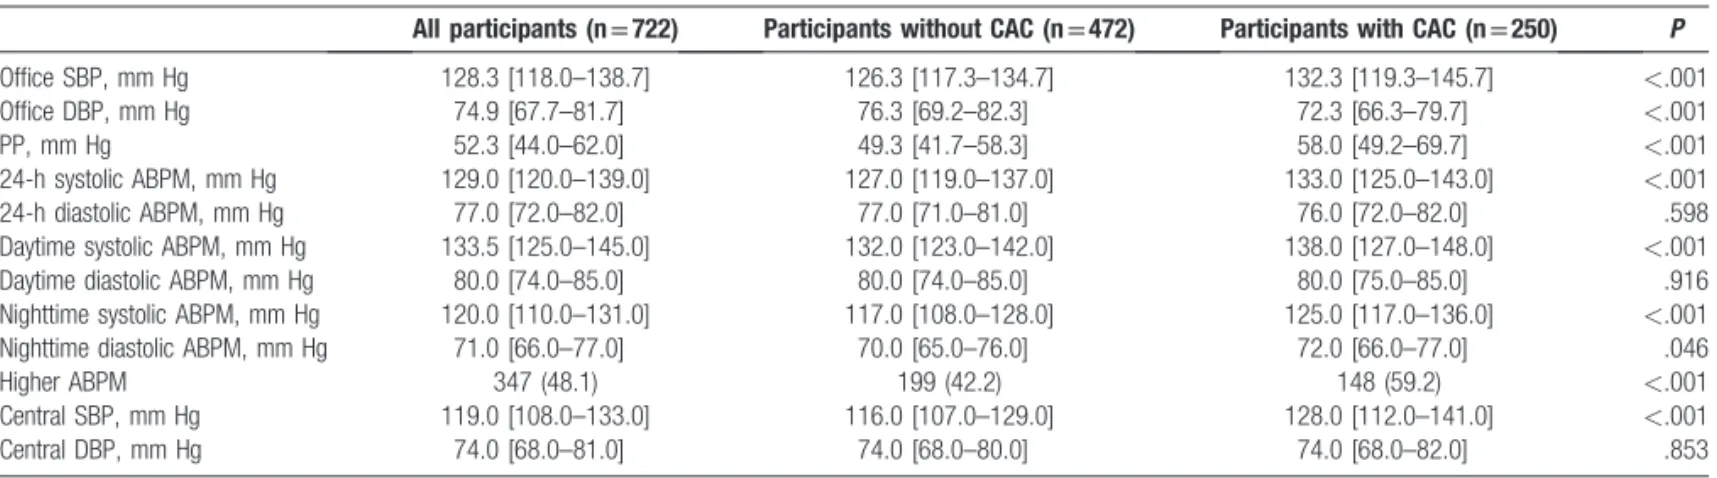 Figure 2. Mean dipping ratio values and percentages of loss of dipping according to coronary artery calci ﬁcation (CAC) status.